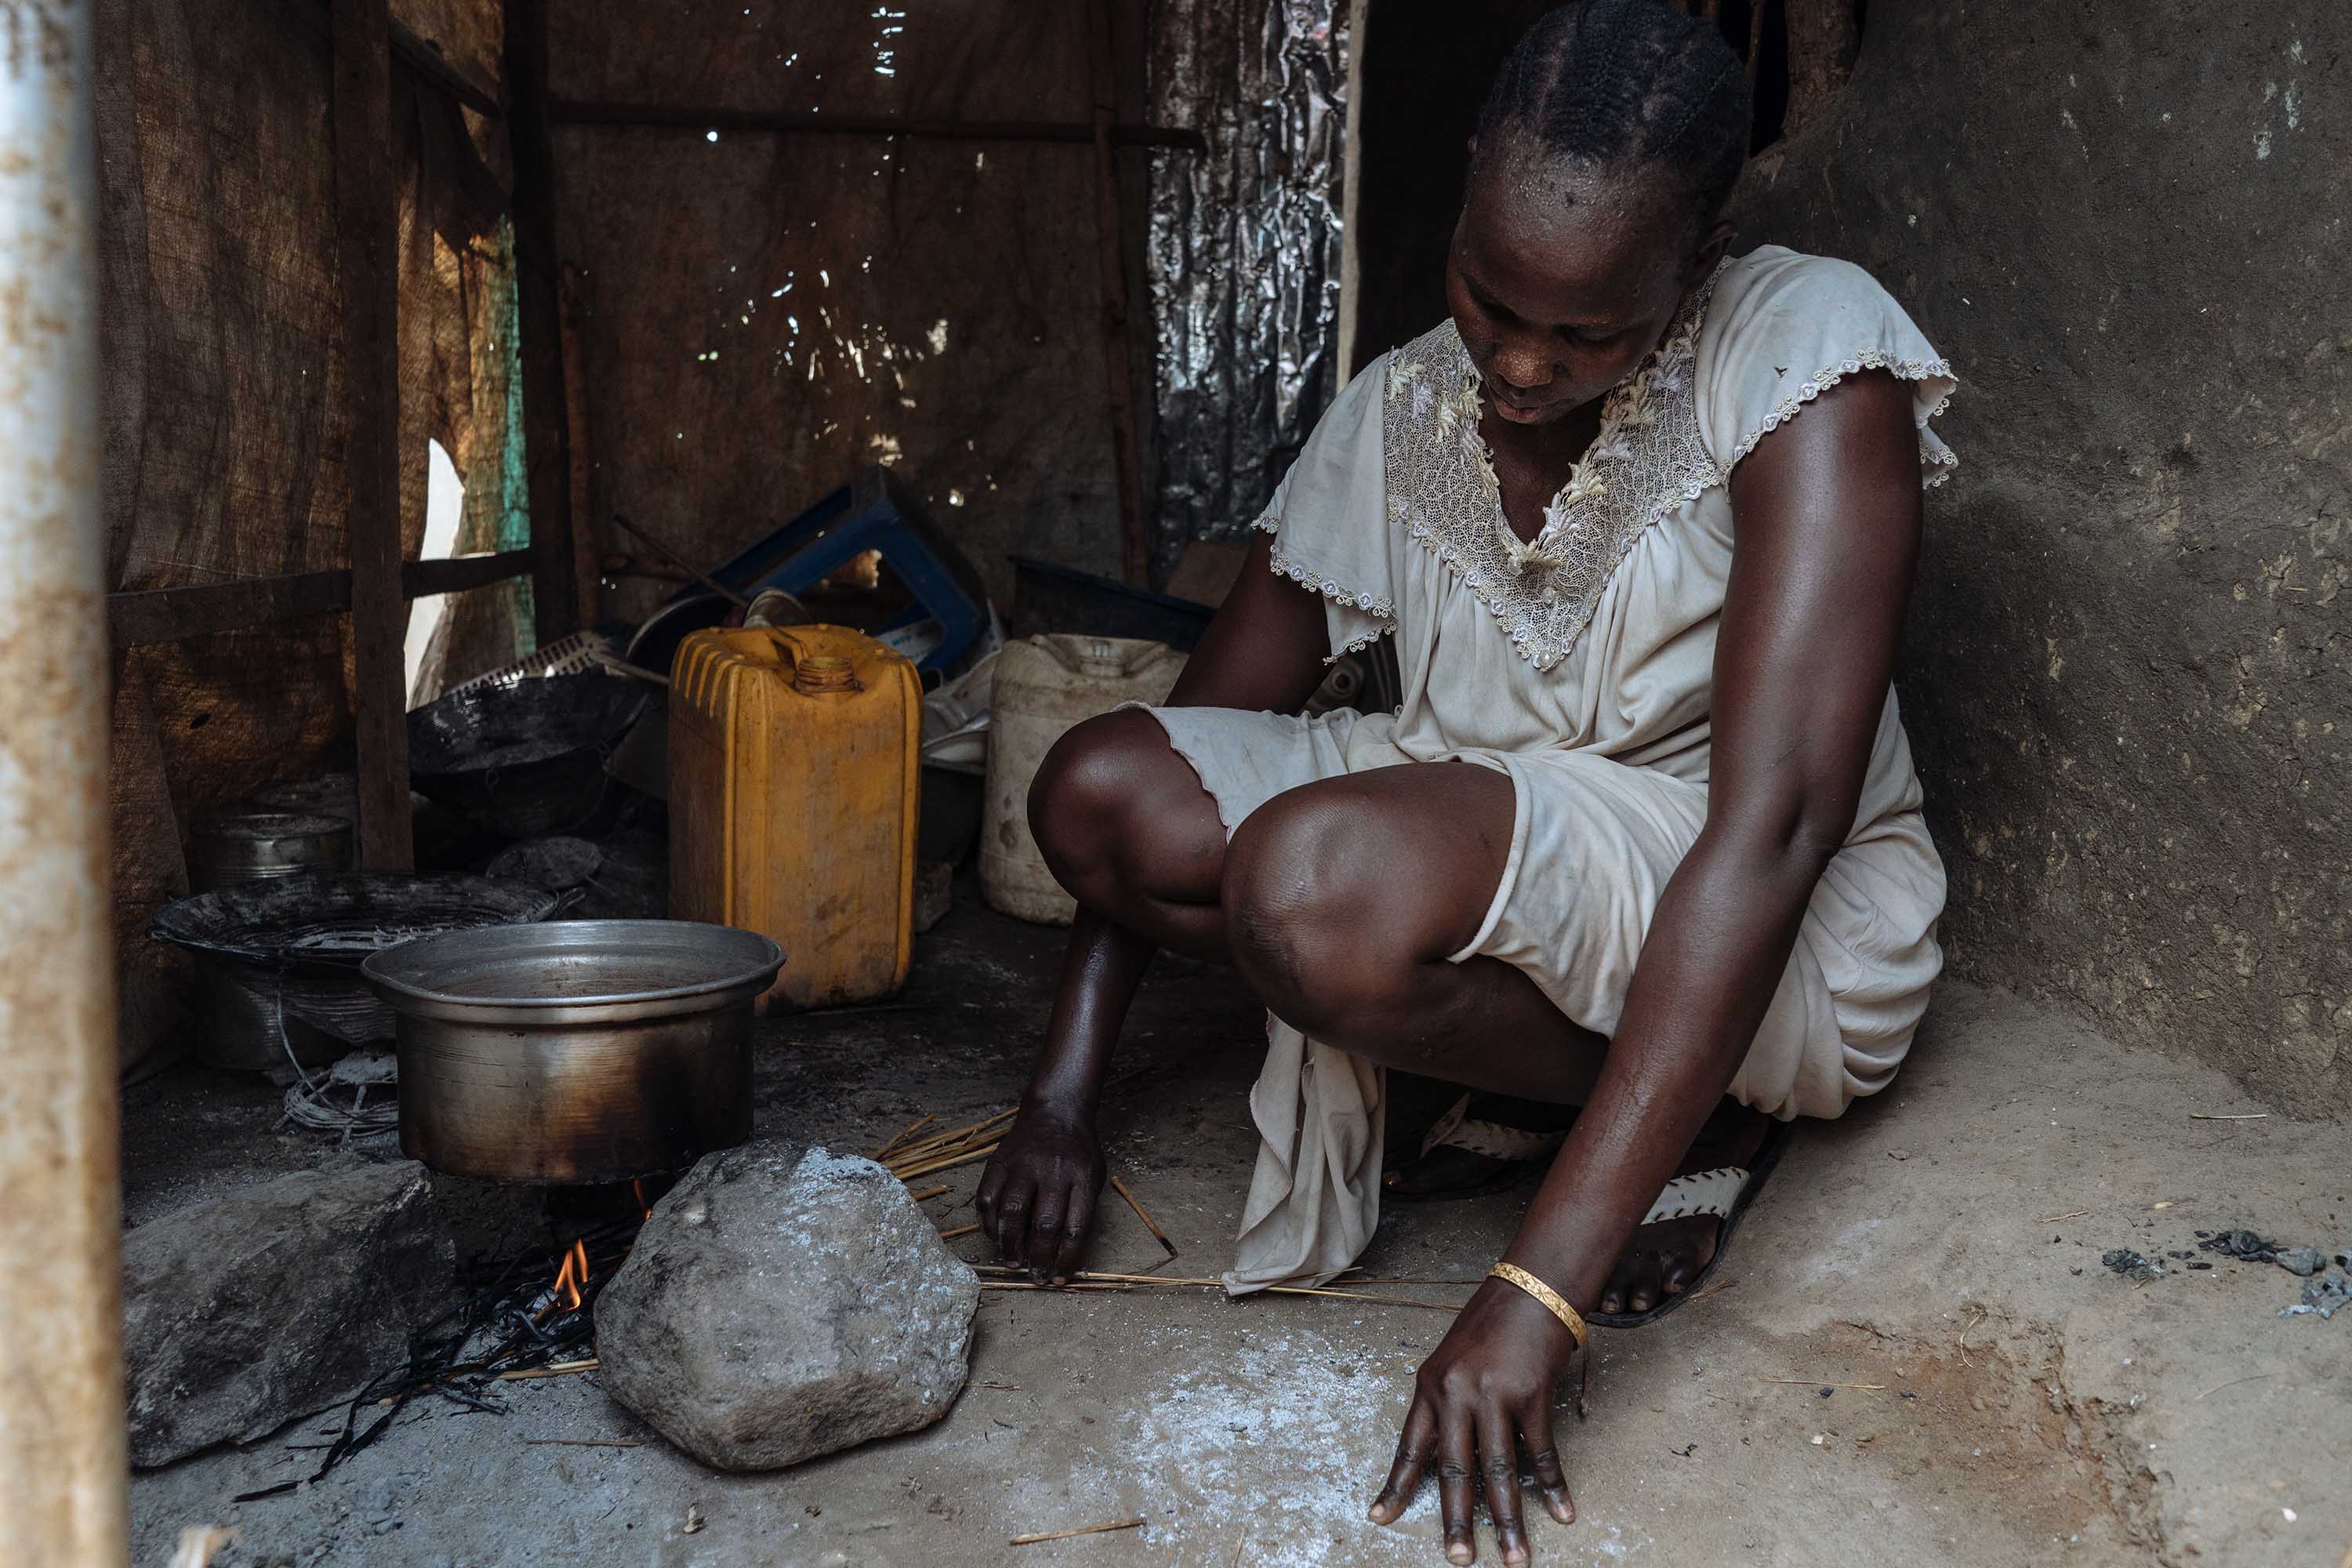 Angeline, a South Sudanese woman, photographed making a fire in her kitchen. 